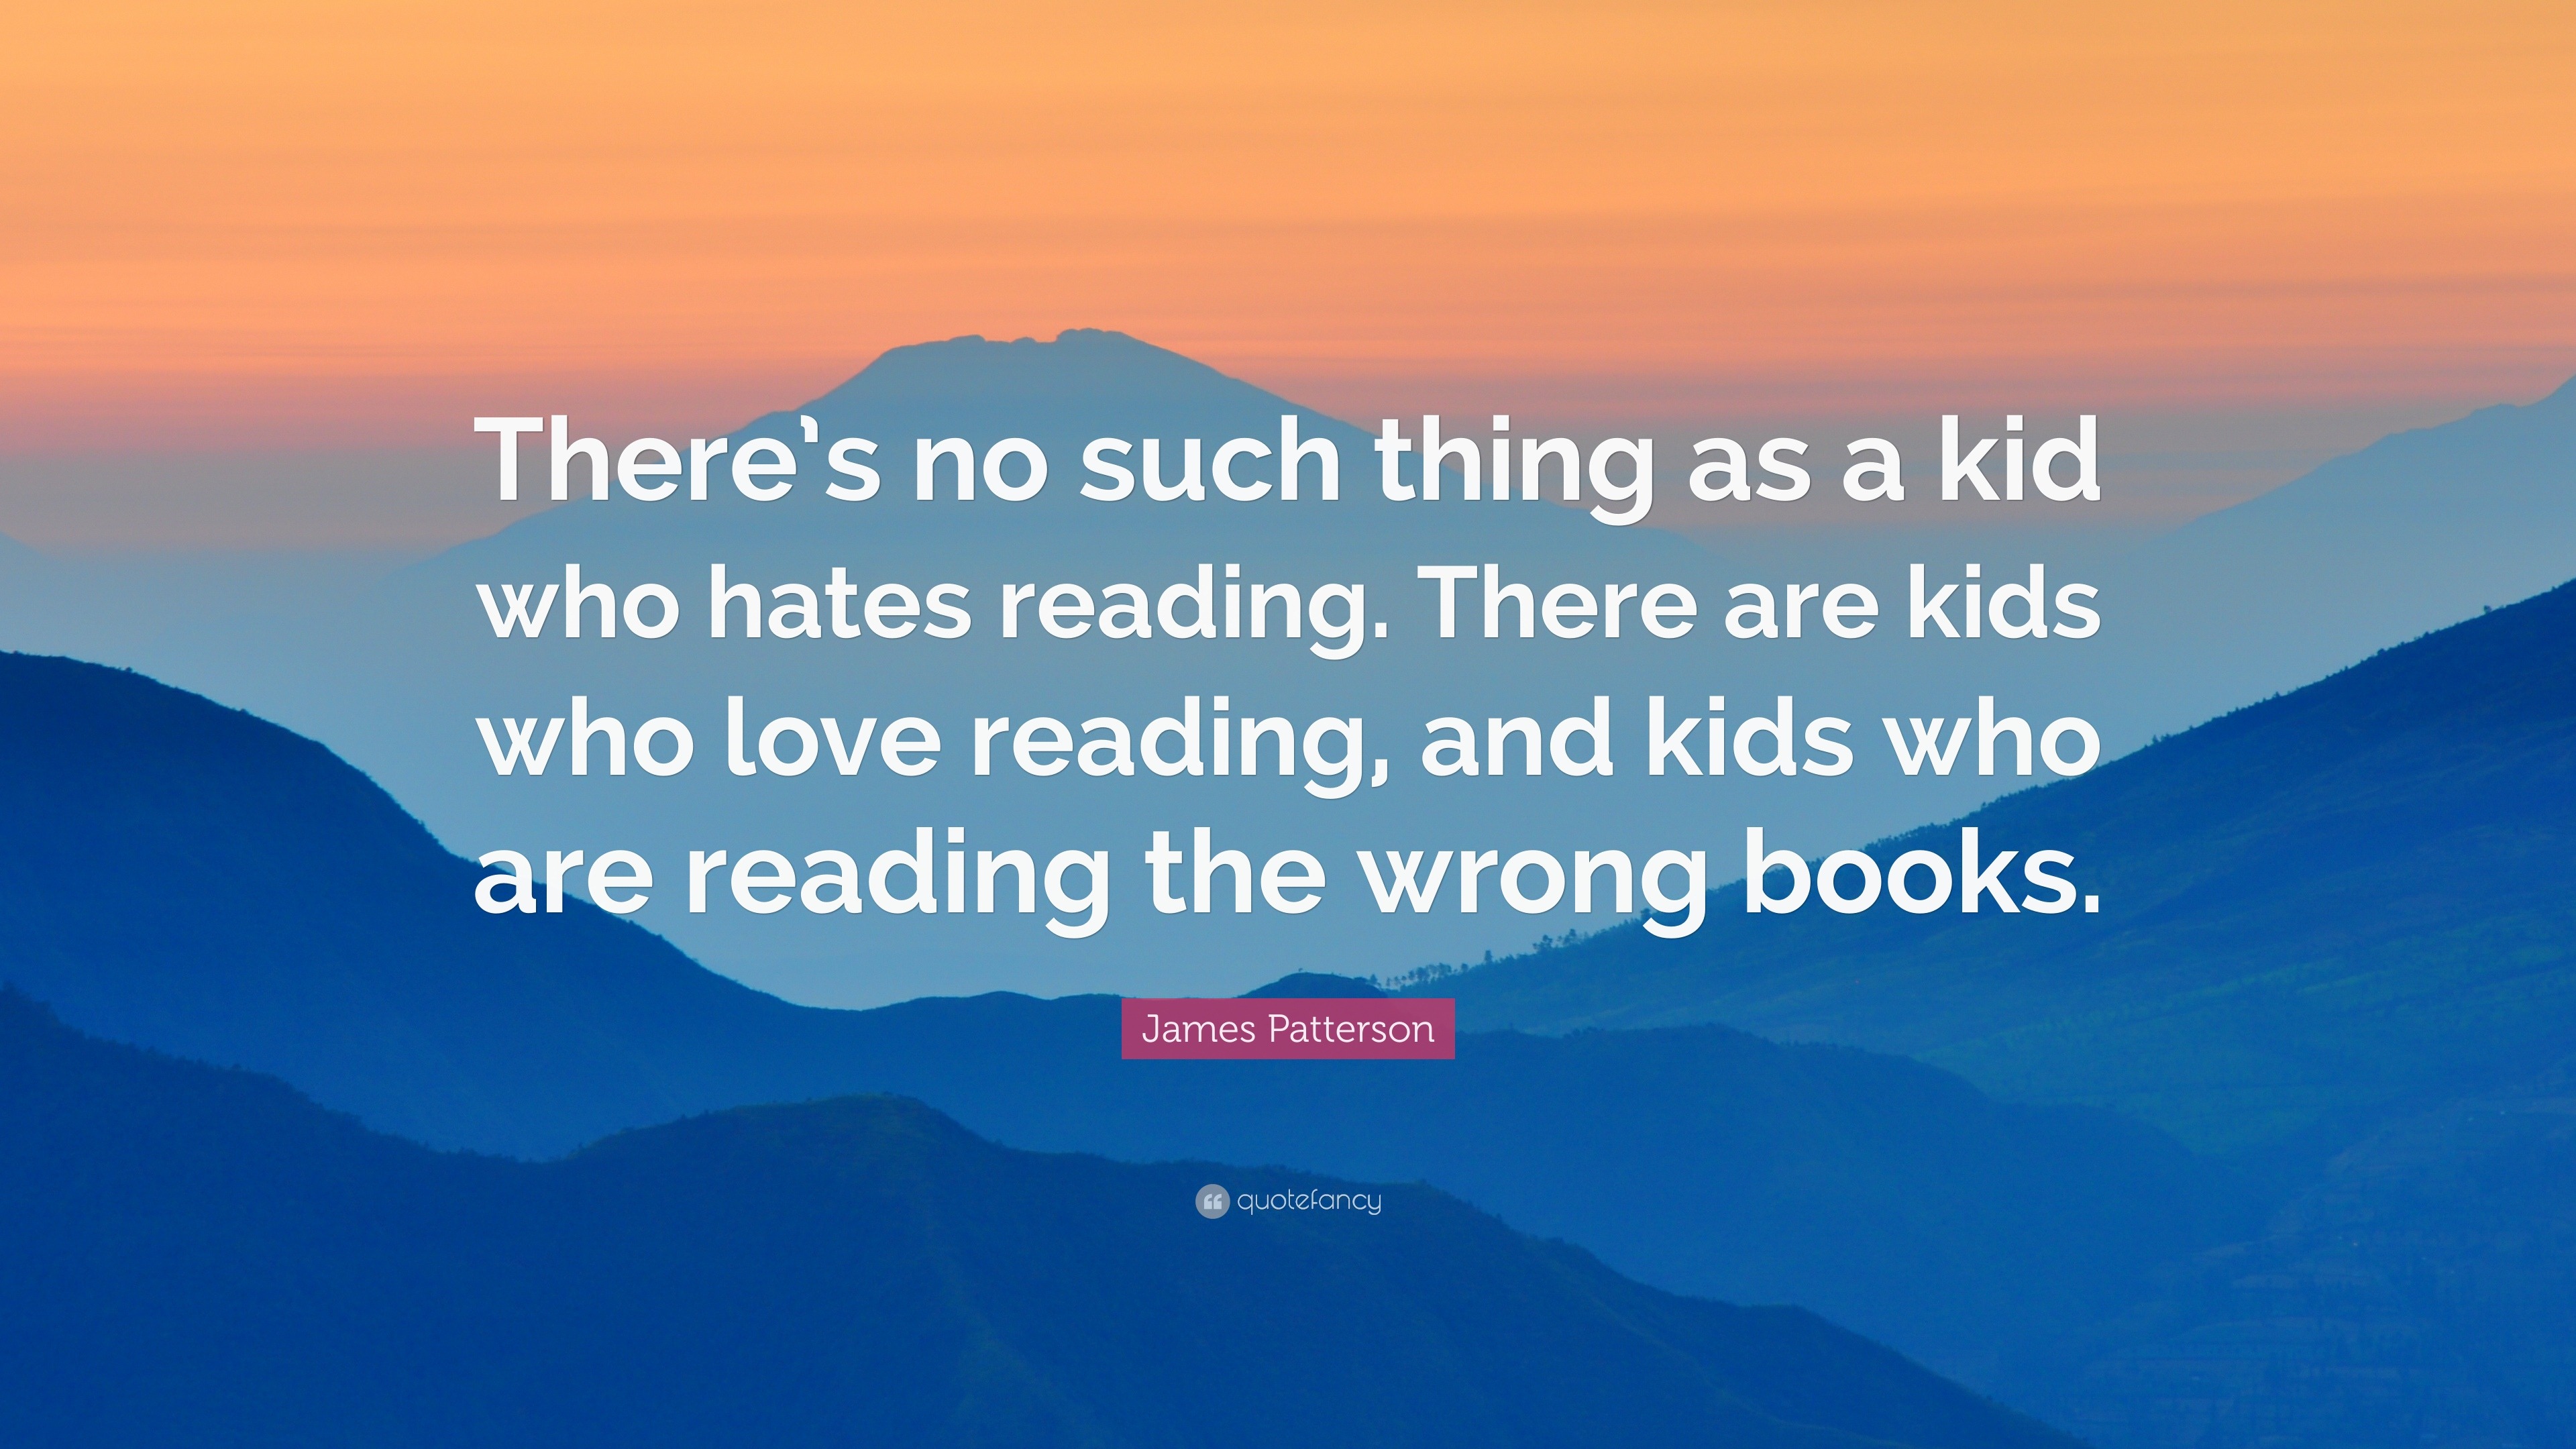 James Patterson Quote: “There's no such thing as a kid who hates reading.  There are kids who love reading, and kids who are reading the wrong bo...”